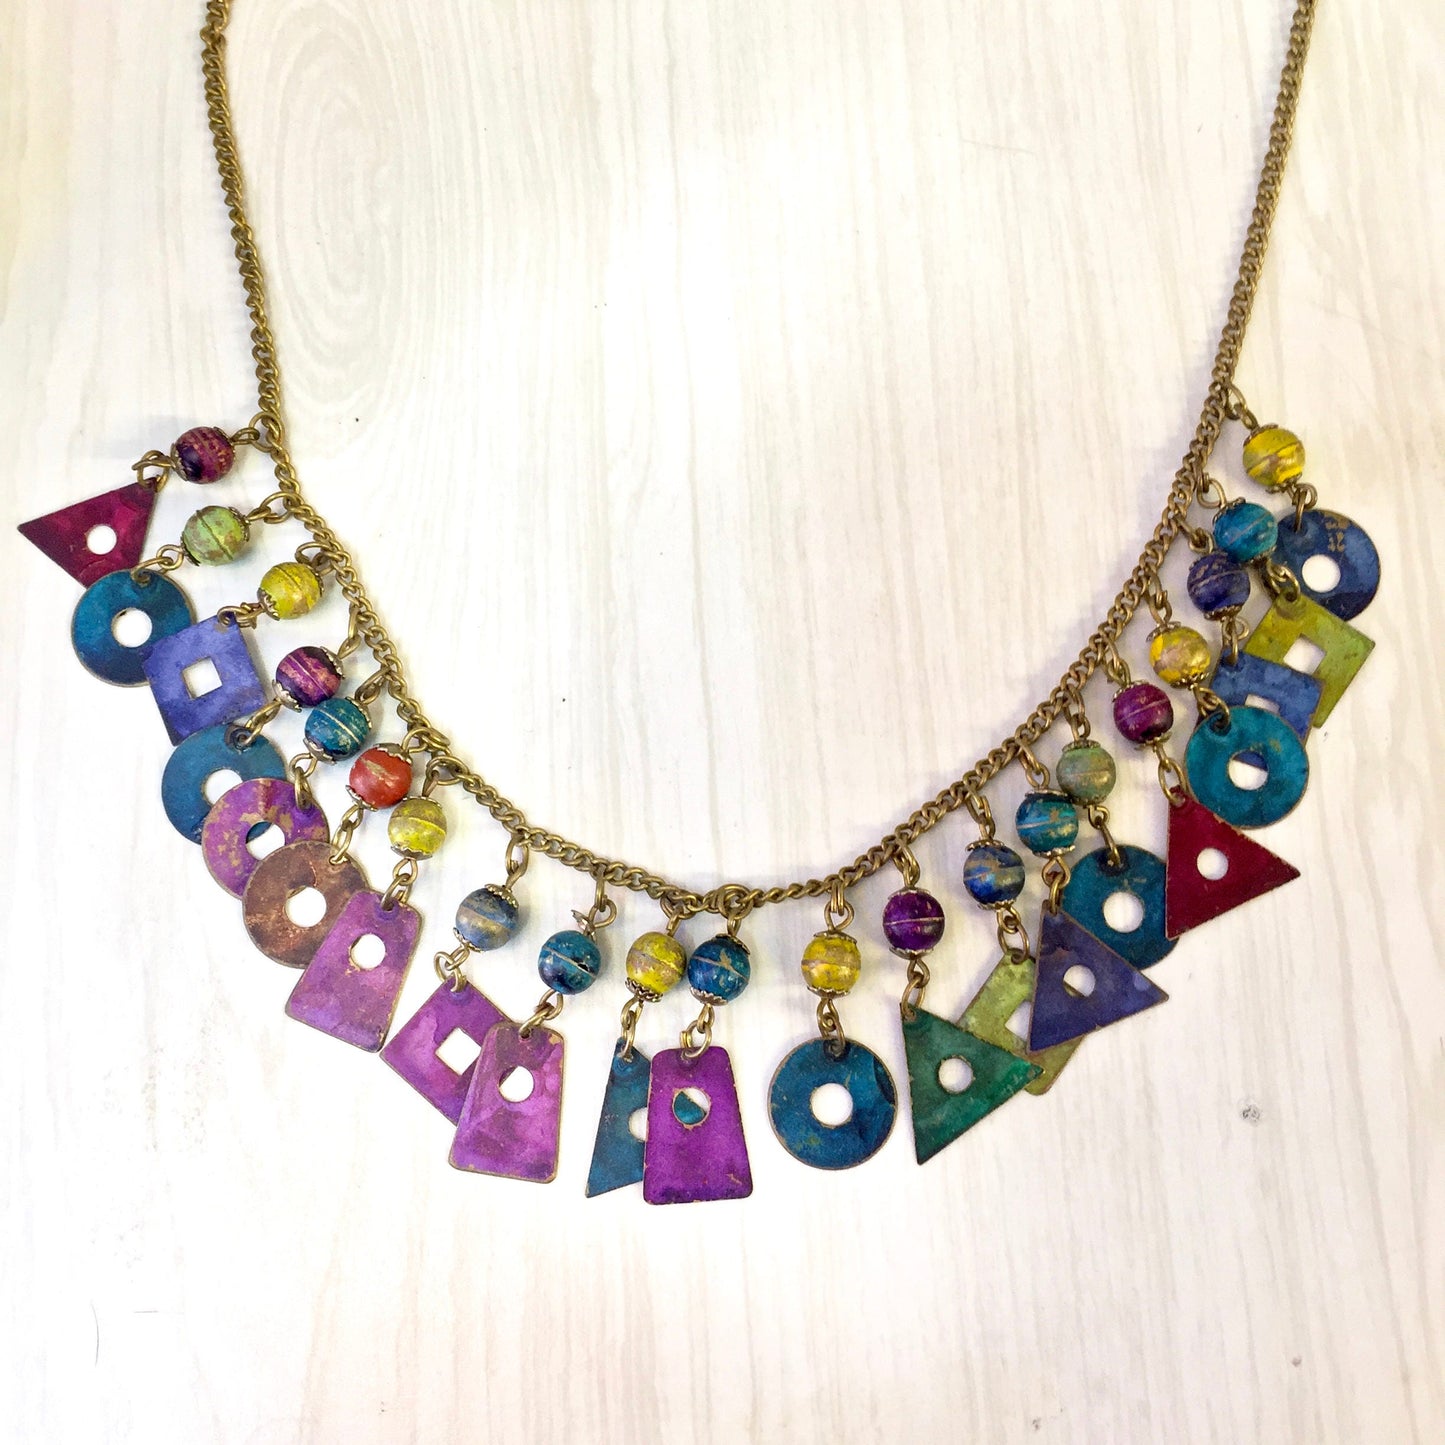 Vintage colorful beaded charm necklace with dangling geometric metal beads in various shapes and vibrant colors, making a unique statement piece and great holiday gift idea.